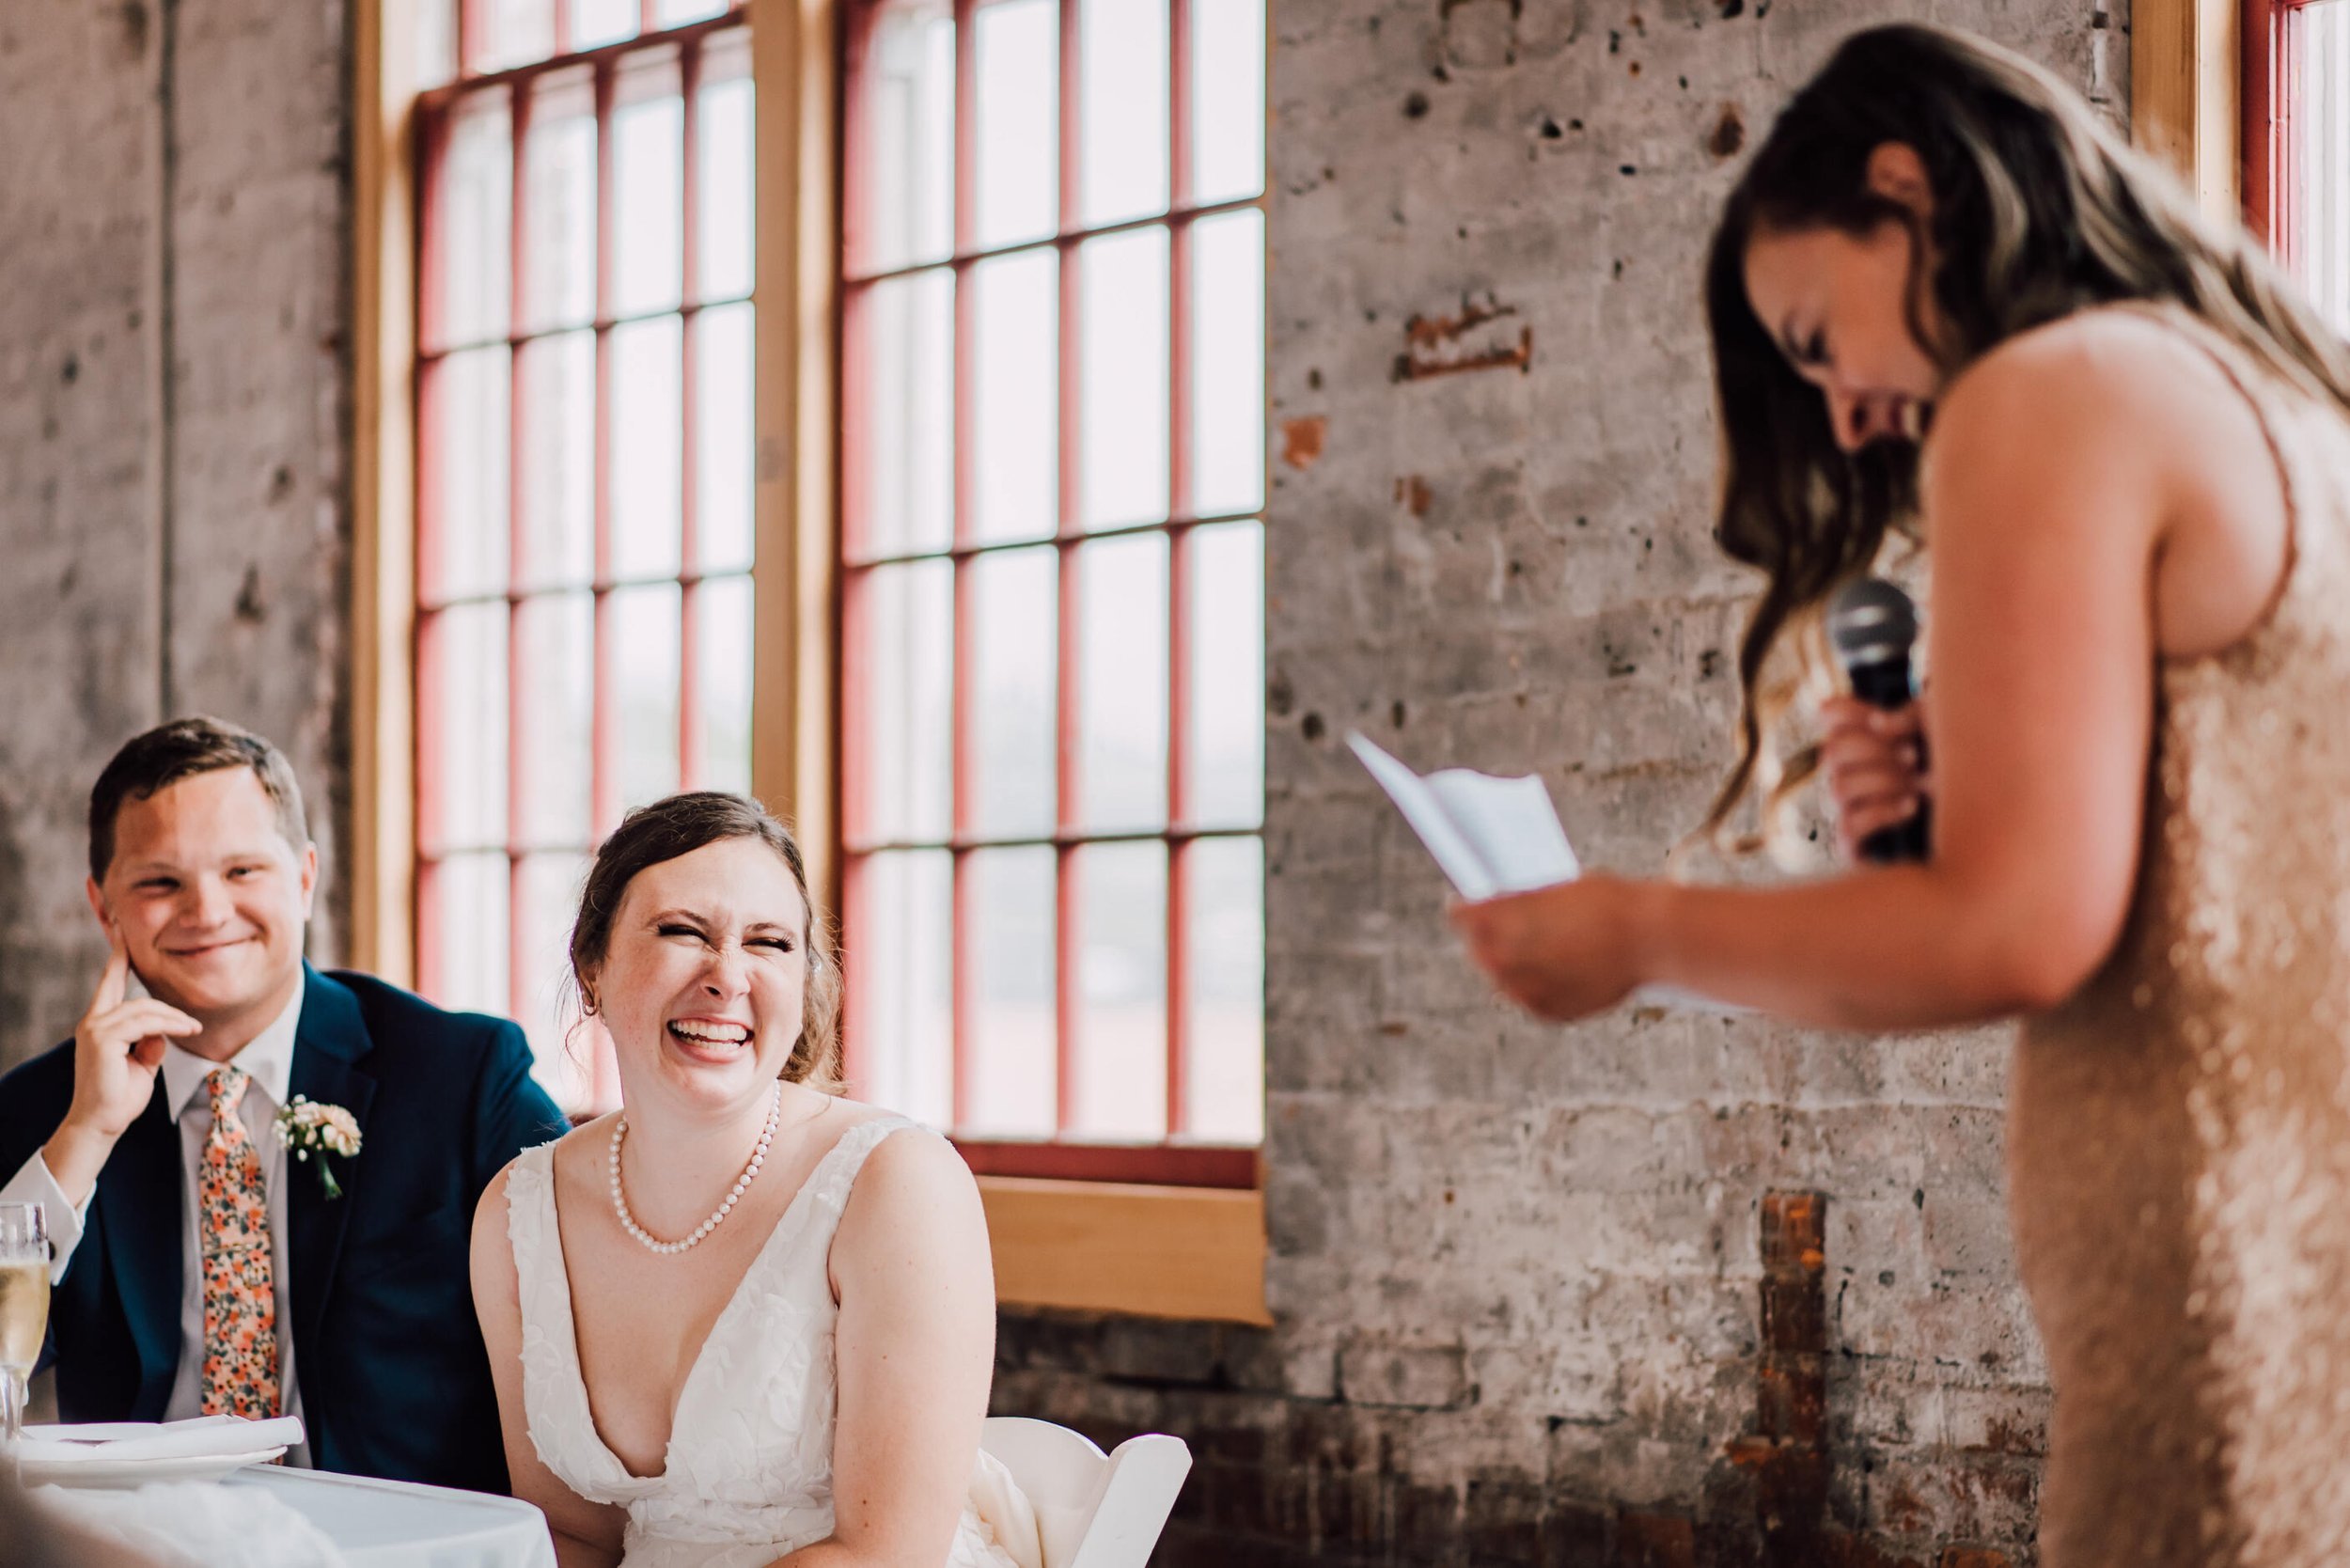  Bride laughs next to her groom during toasts at their warehouse wedding 